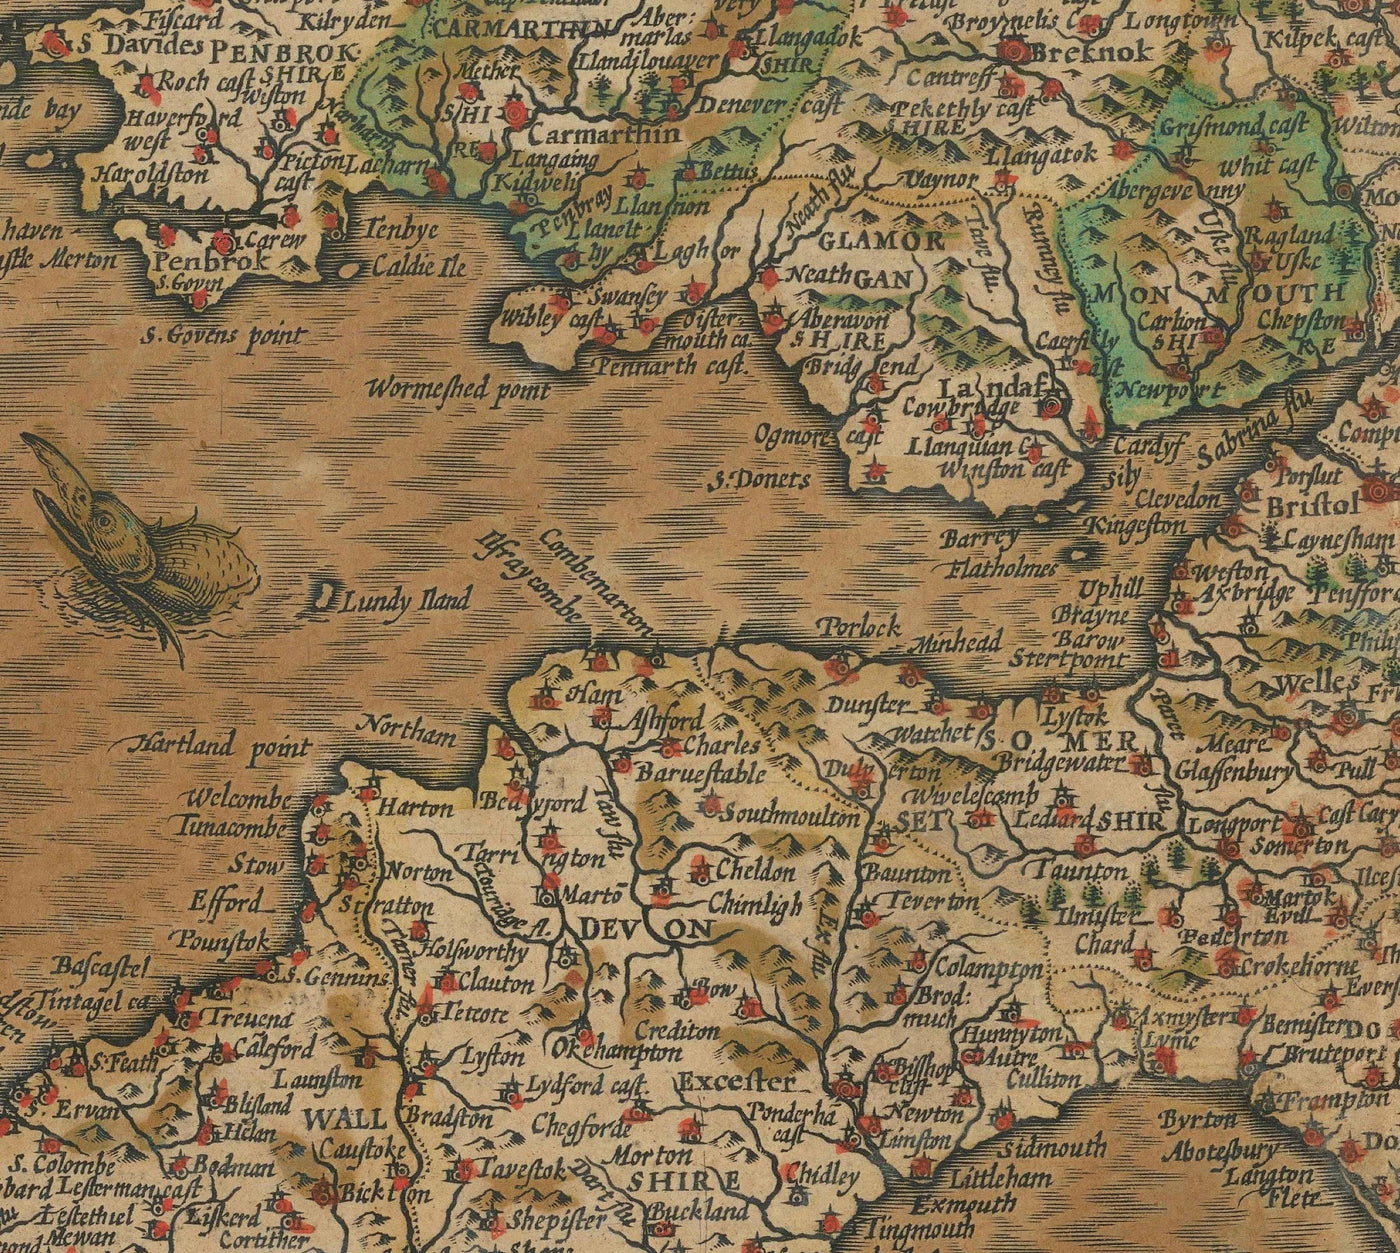 Old Map of England & Wales by John Speed, 1611 - Rare Handcoloured Chart of the "Kingdome of England"